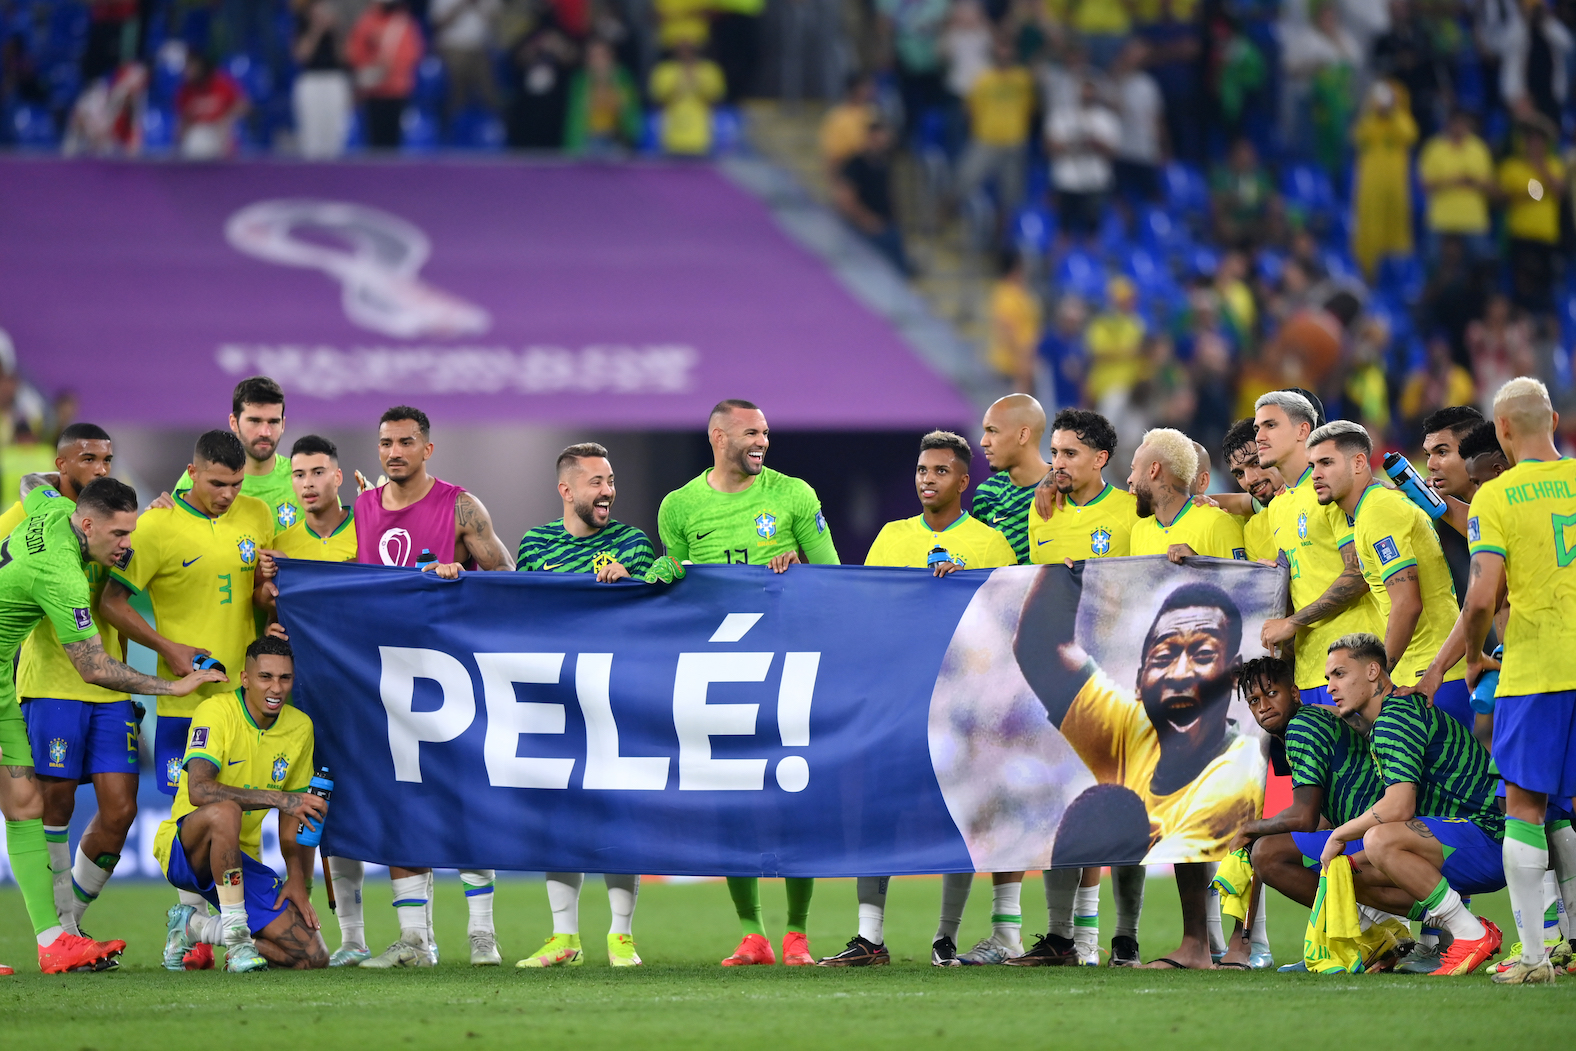 Brazil players hold a banner showing support for former Brazil player Pelé after the FIFA World Cup in 2022